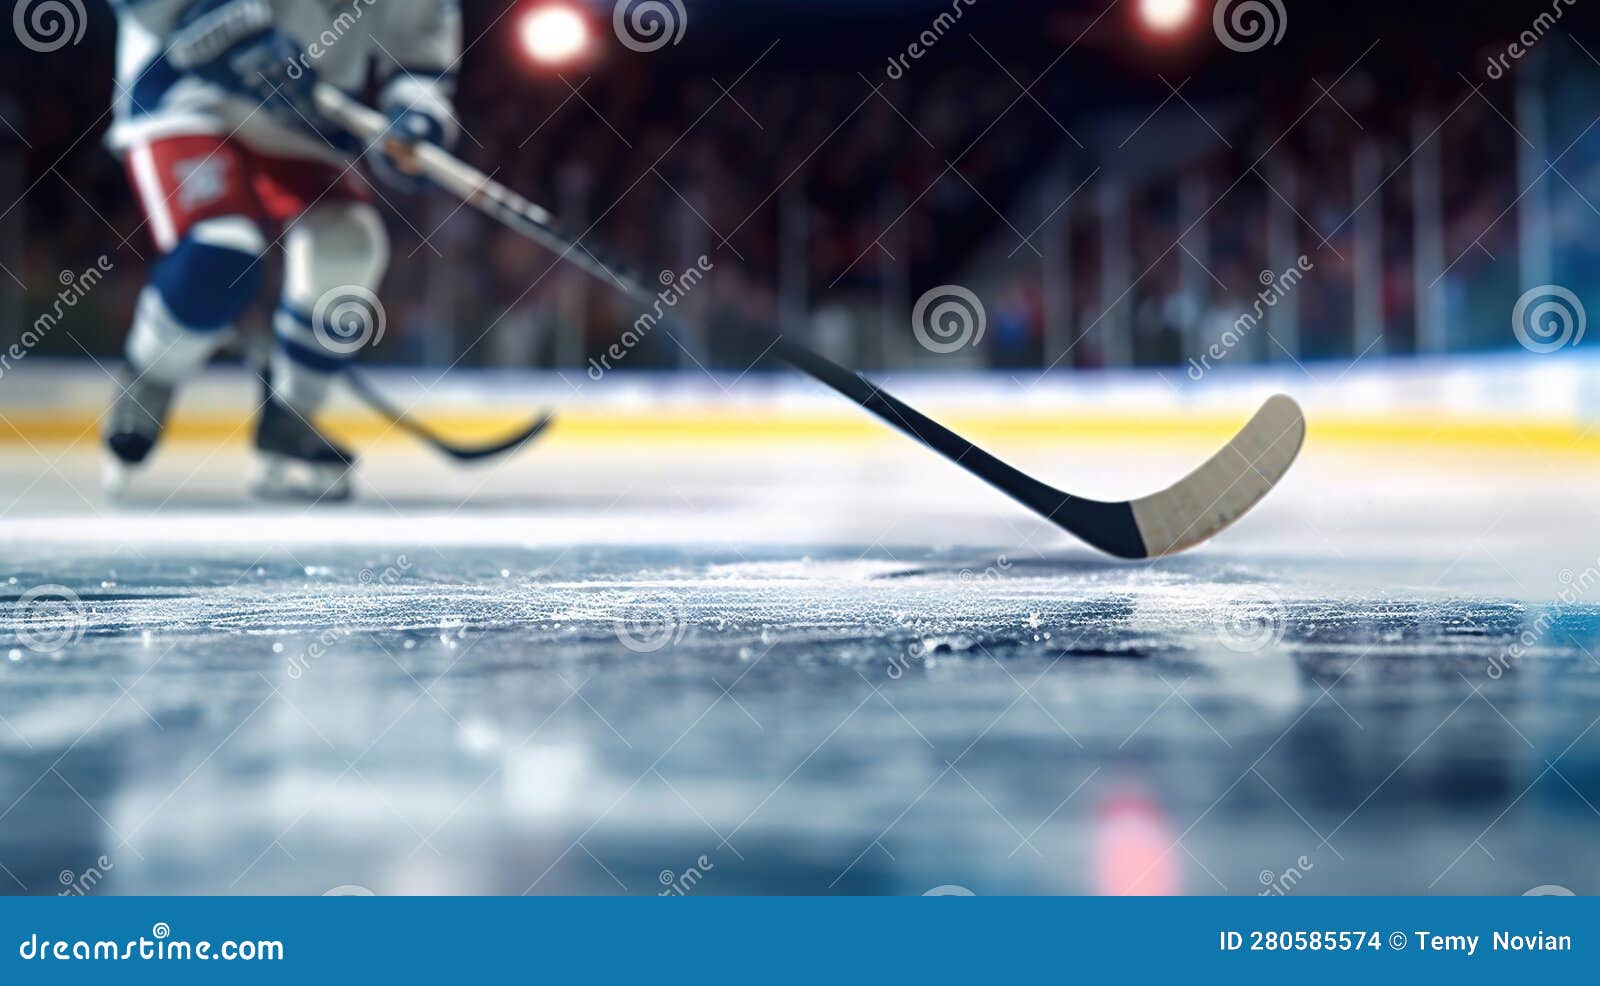 Close Up of Ice Hockey Stick on Ice Rink in Position To Hit Hockey Puck ...